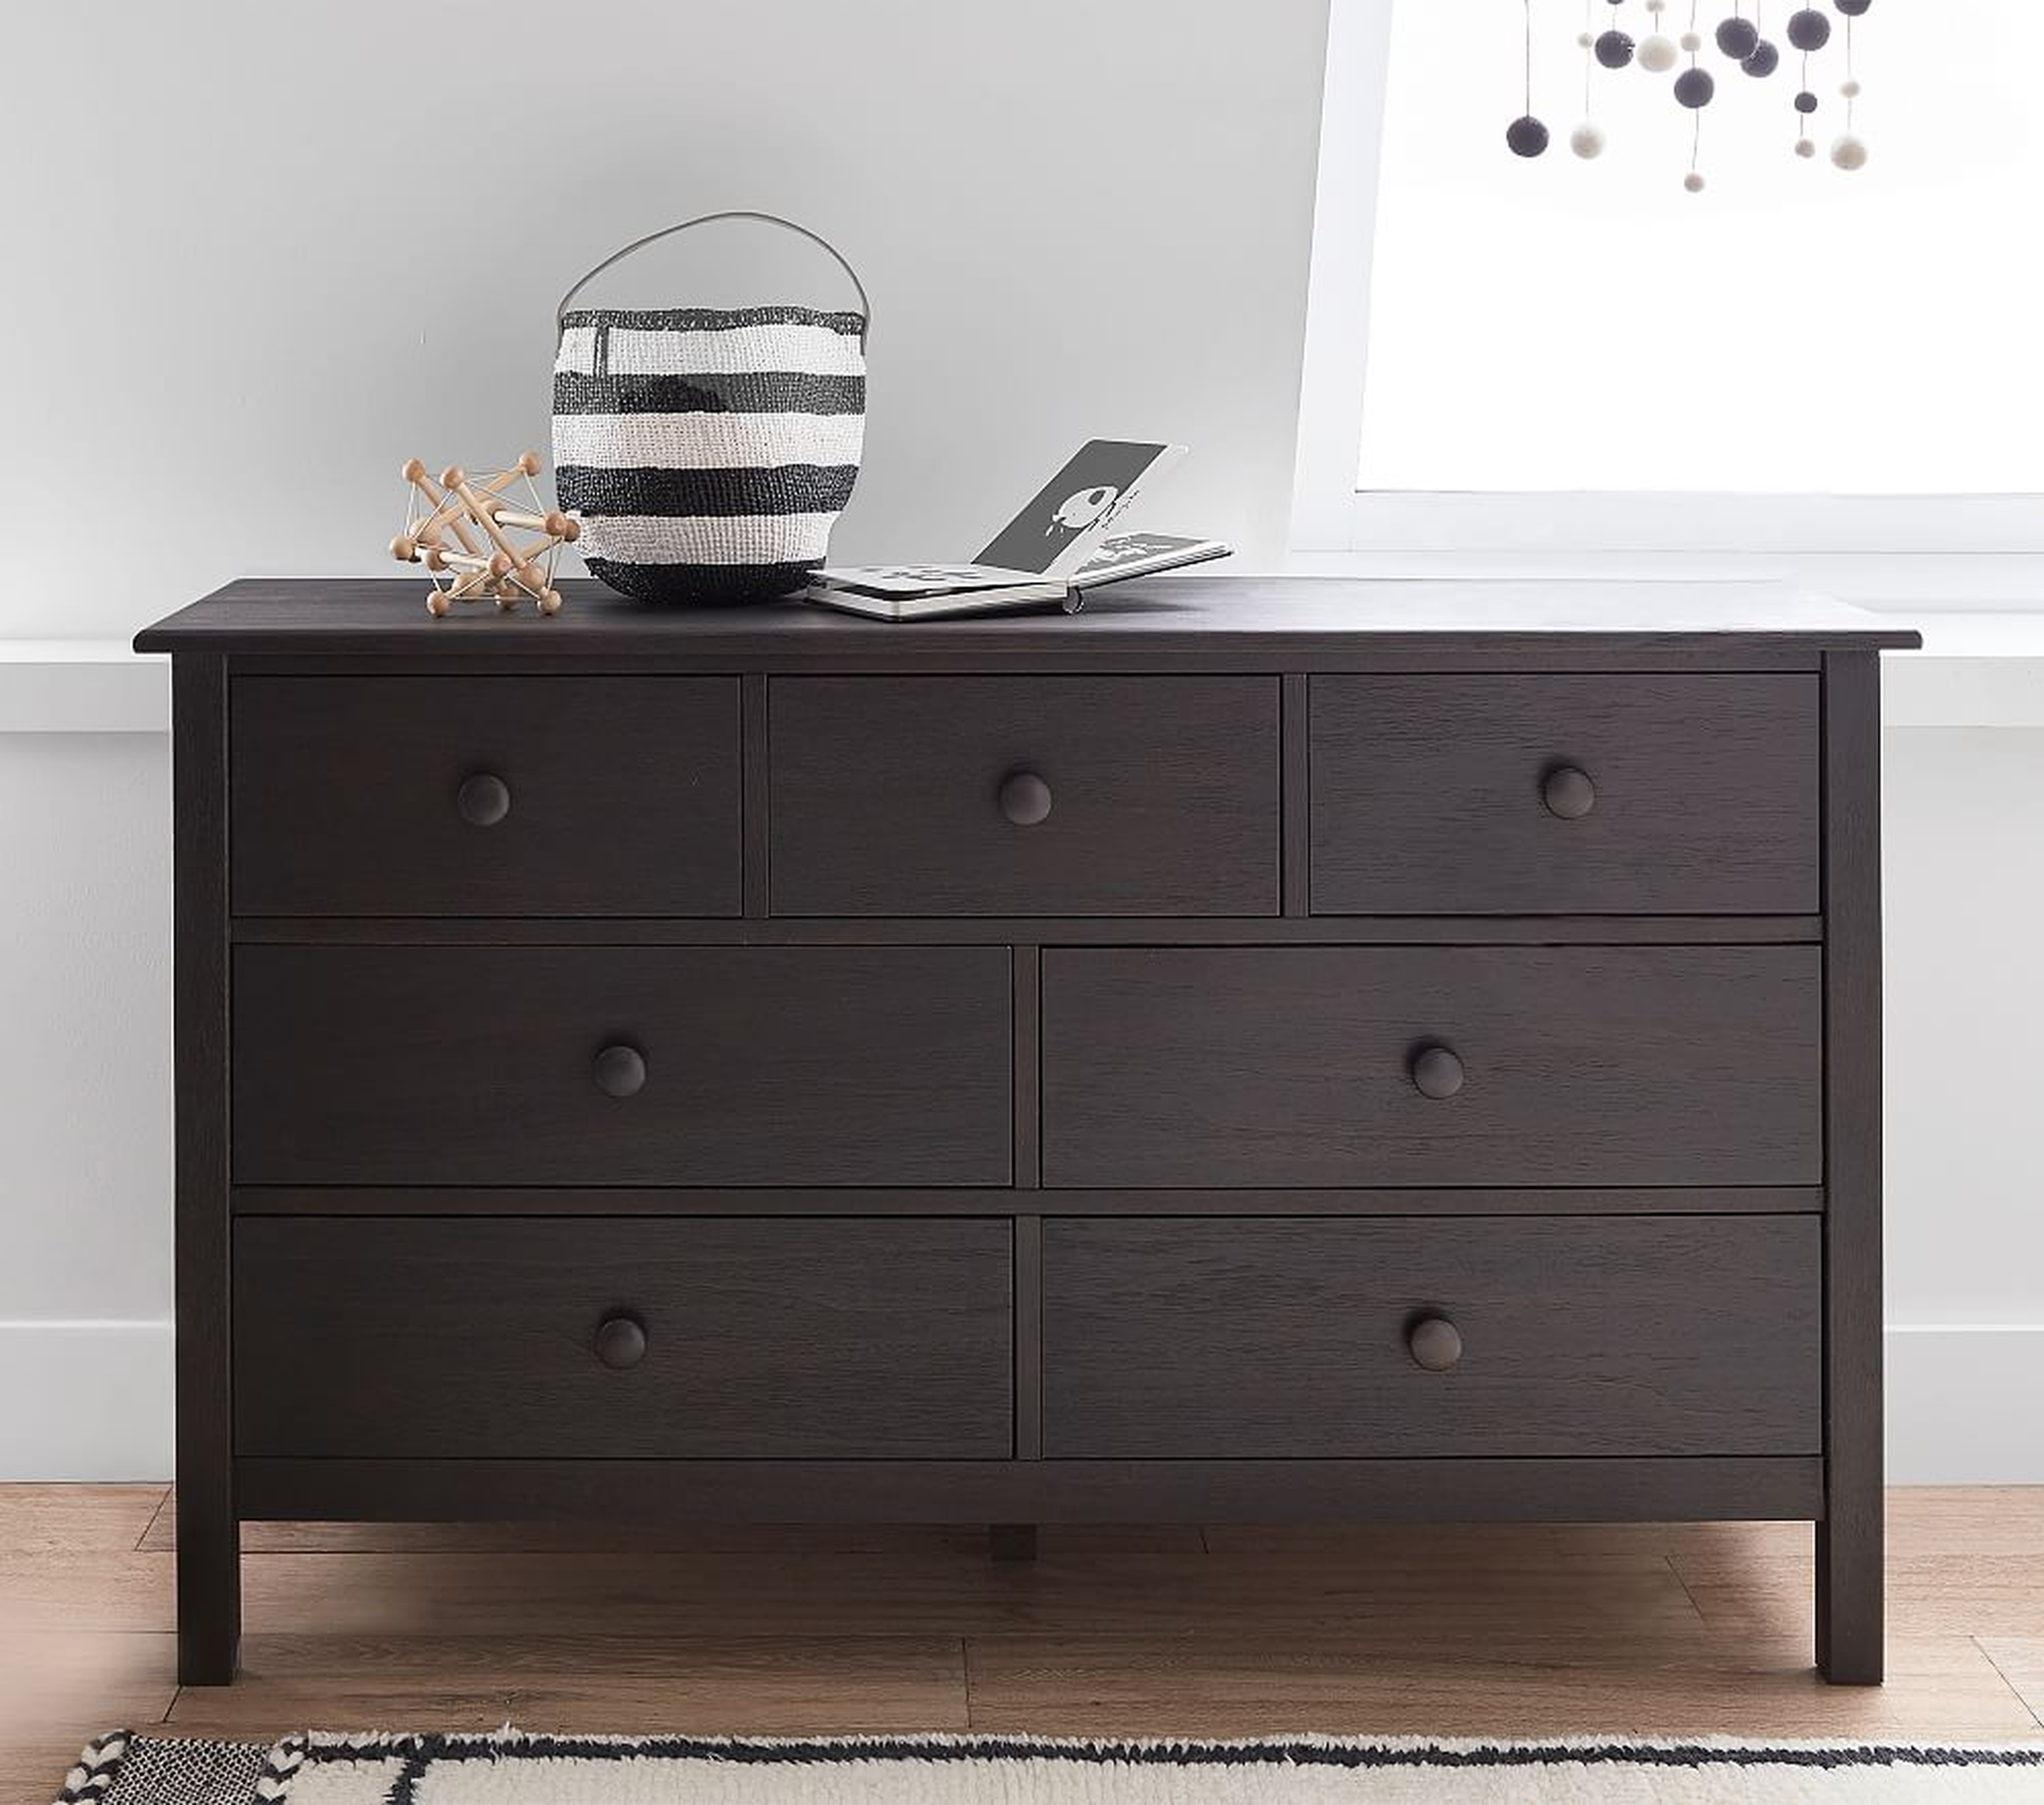 Kendall Extra-Wide Nursery Dresser, Weathered Slate, In-Home Delivery - Pottery Barn Kids